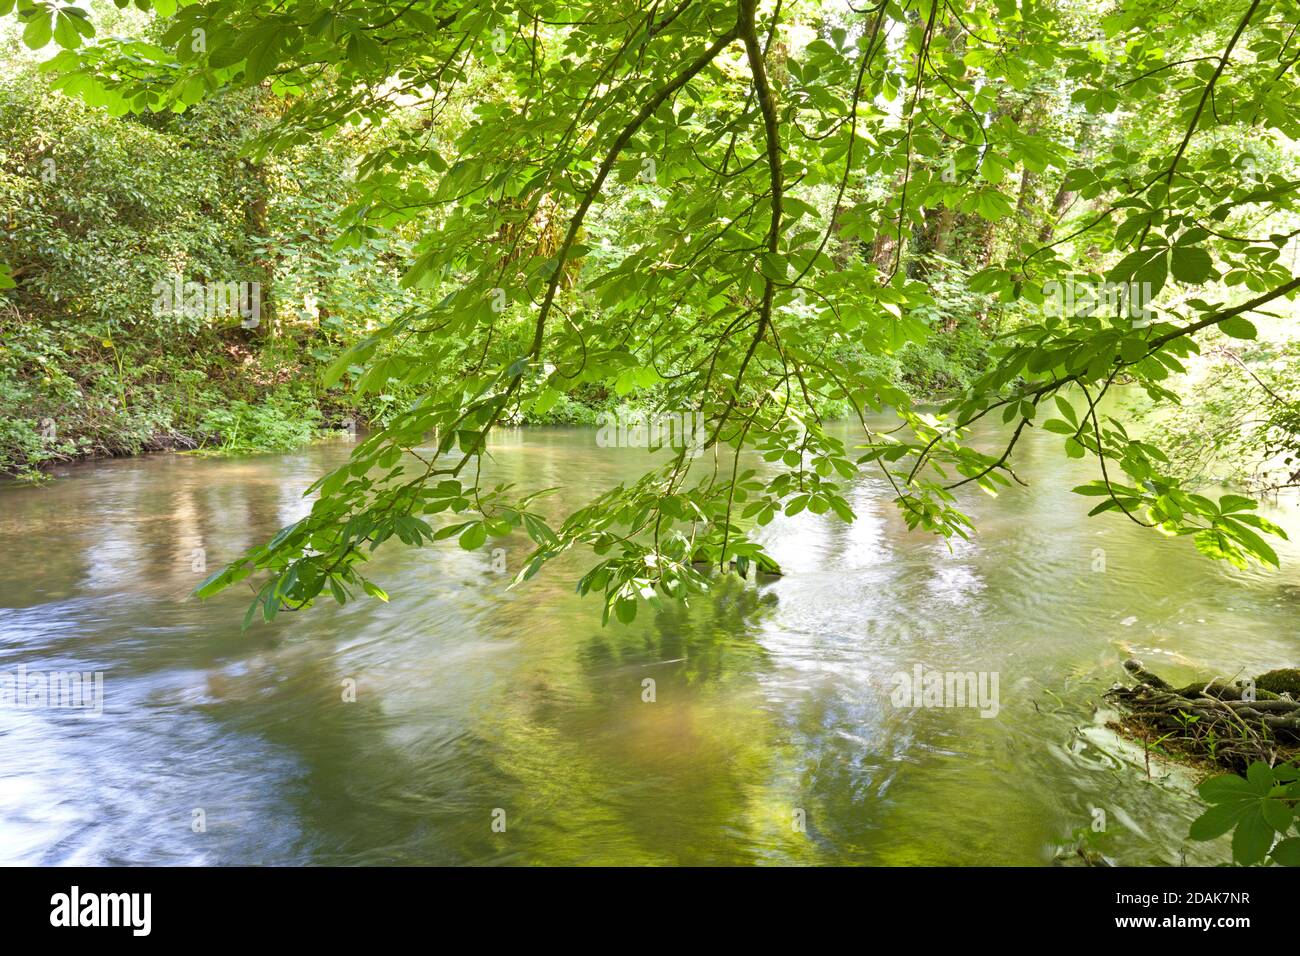 Overhanging horse chestnut branches on the River Wylye at Codford in Wiltshire. Stock Photo